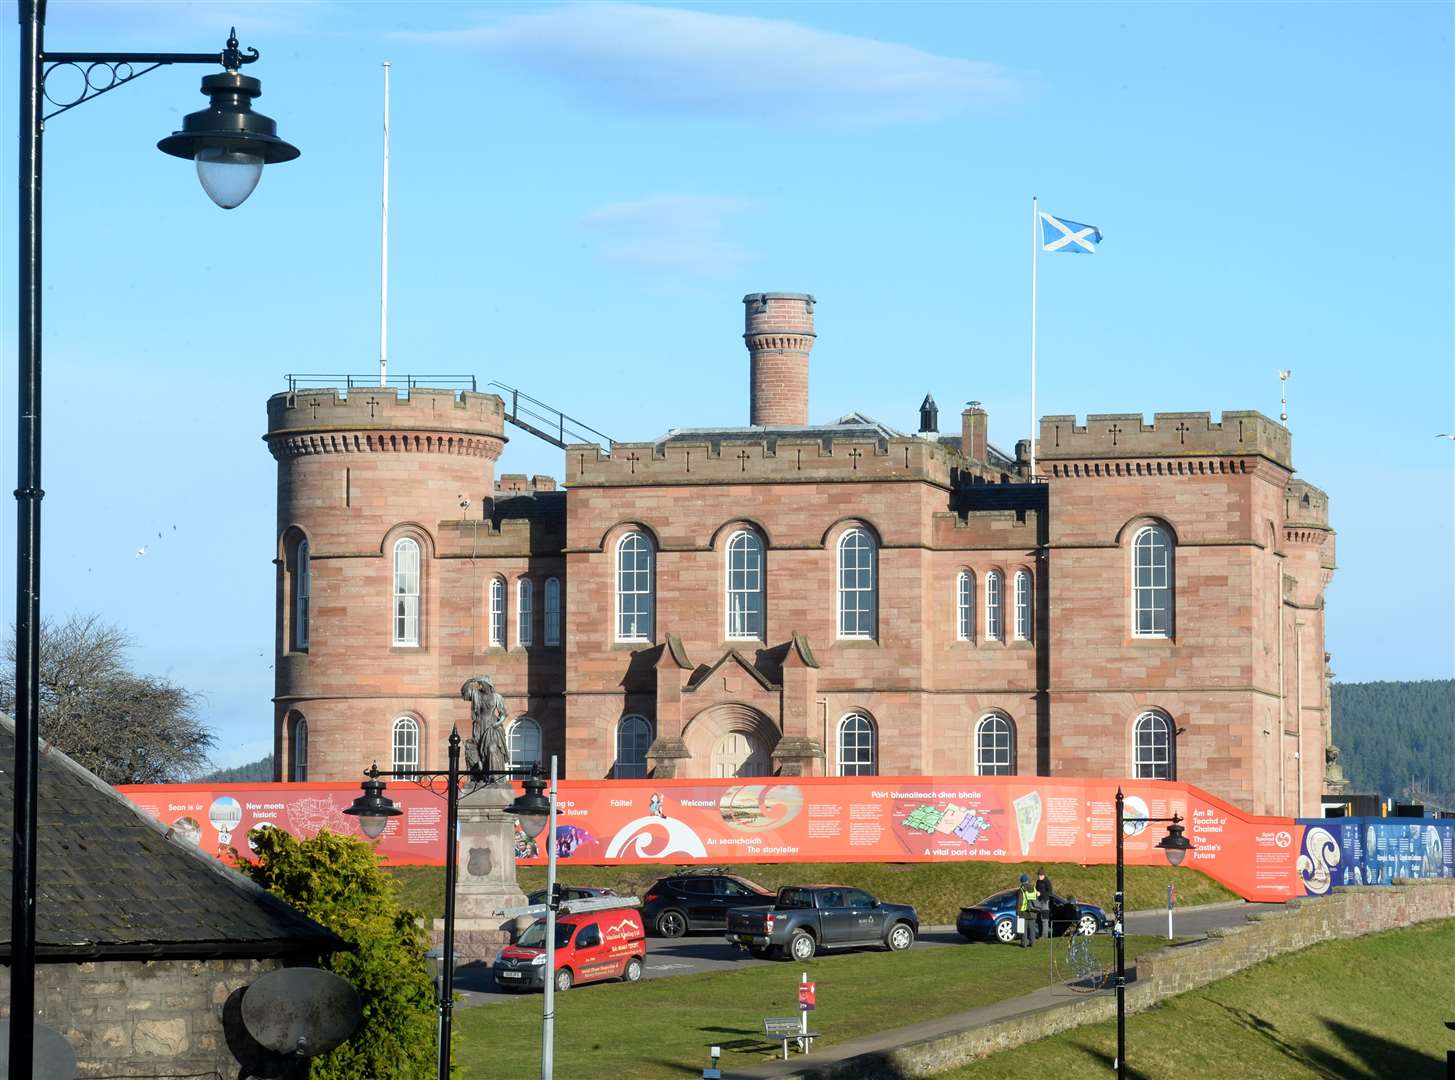 Inverness Castle is to be transformed into a major tourist attraction.